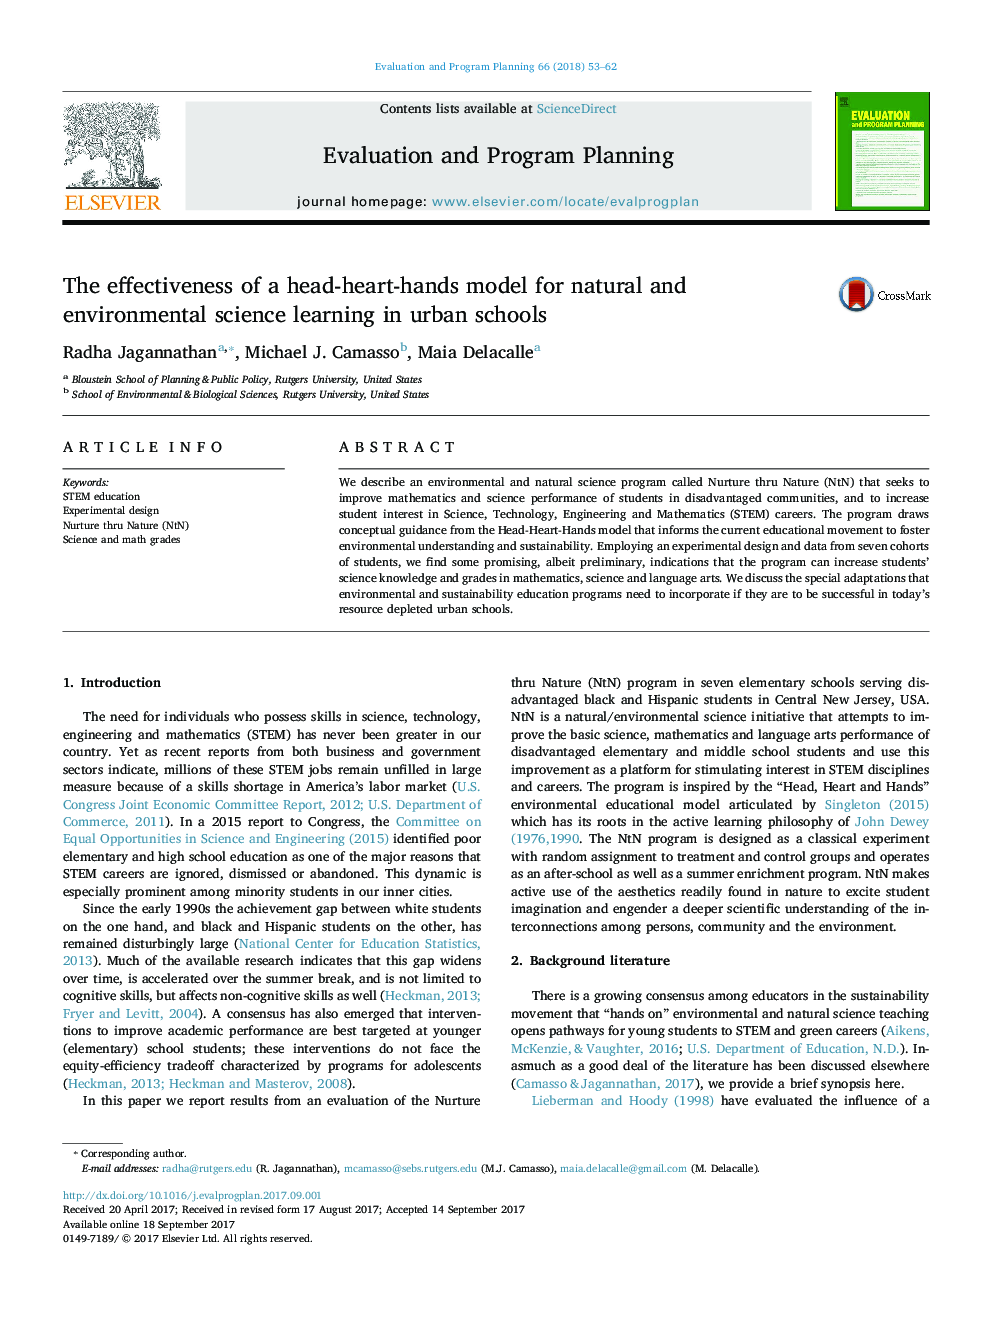 The effectiveness of a head-heart-hands model for natural and environmental science learning in urban schools